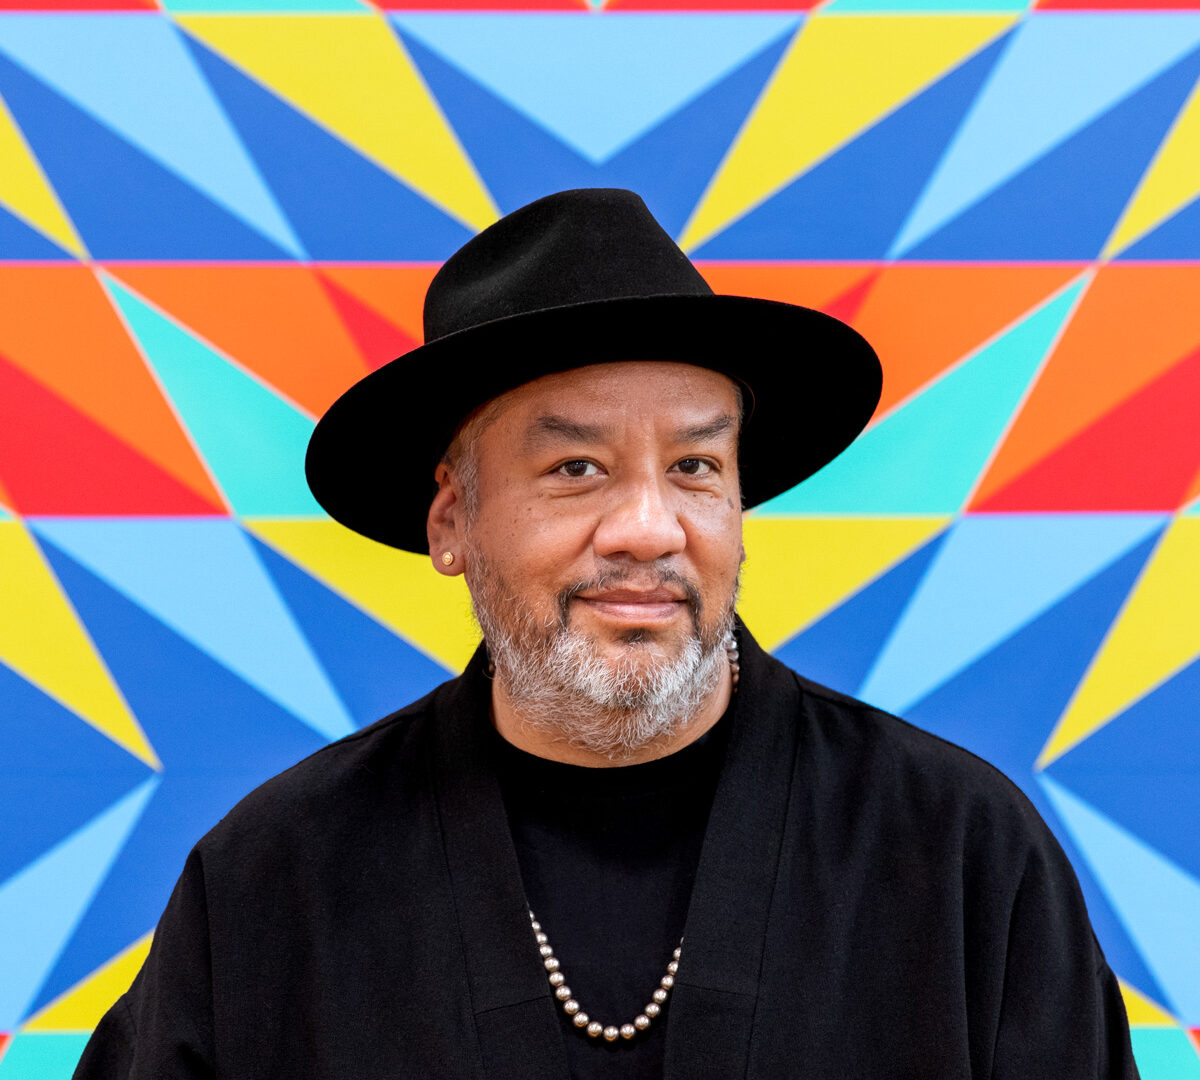 Portrait of artist Jeffrey Gibson wearing a black hat, a black shirt and jacket and a silver necklace. Standing against a colorful background.